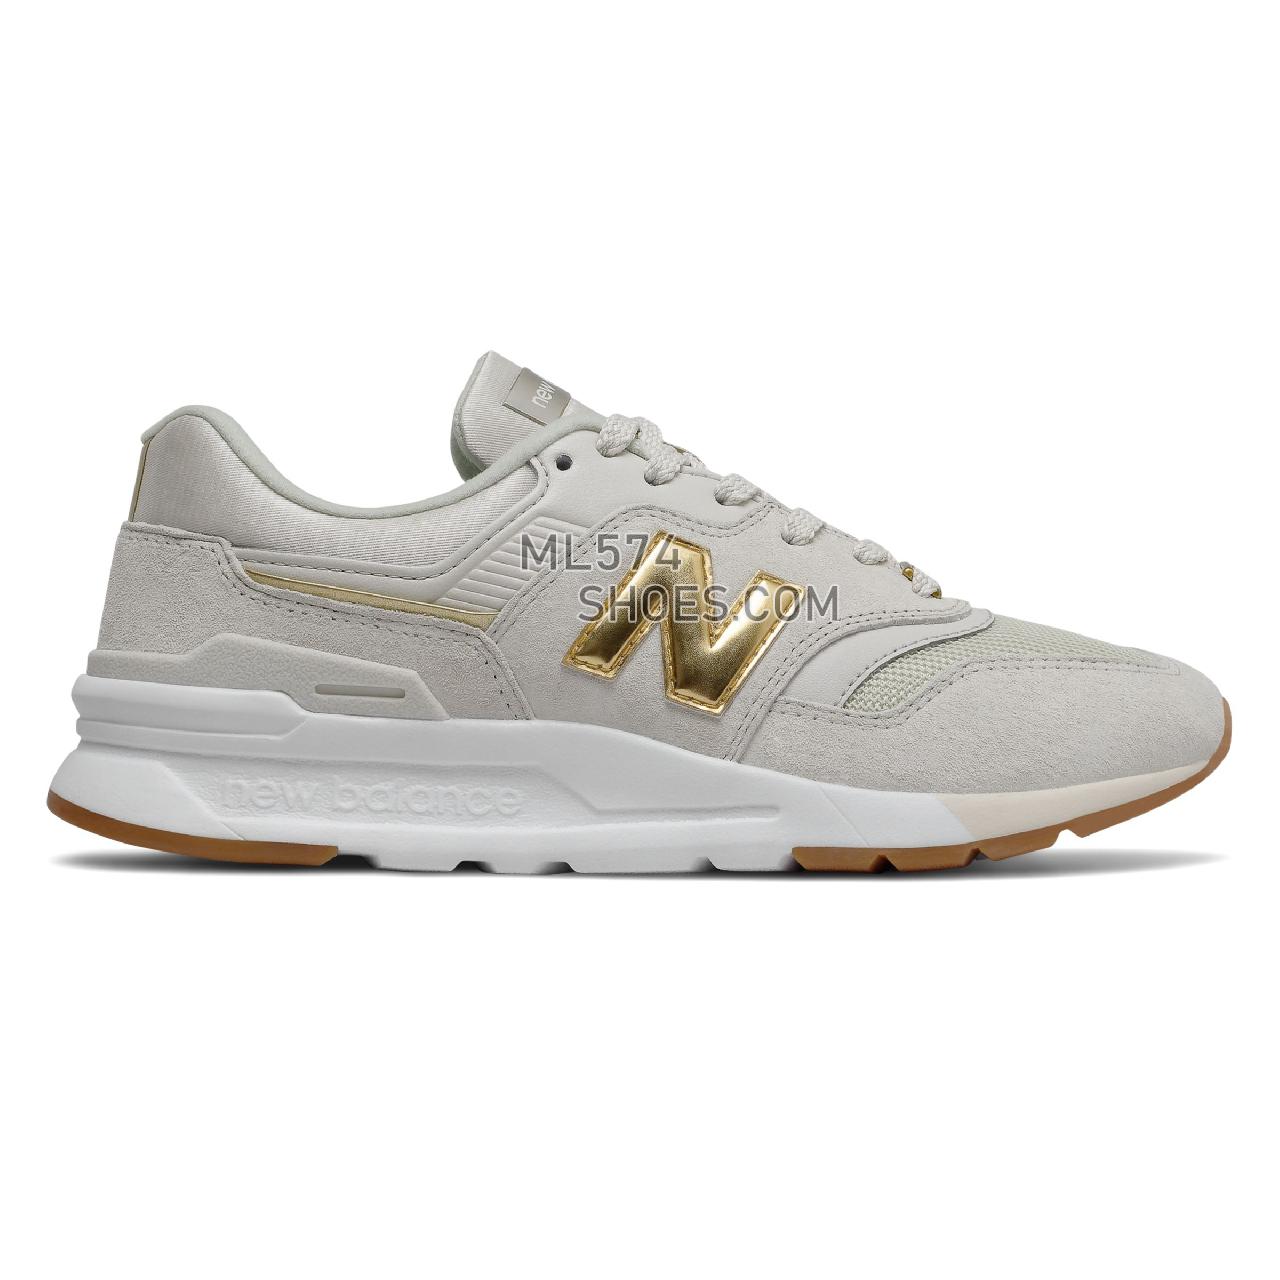 New Balance 997H - Women's Classic Sneakers - Moonbeam with Gold - CW997HAG